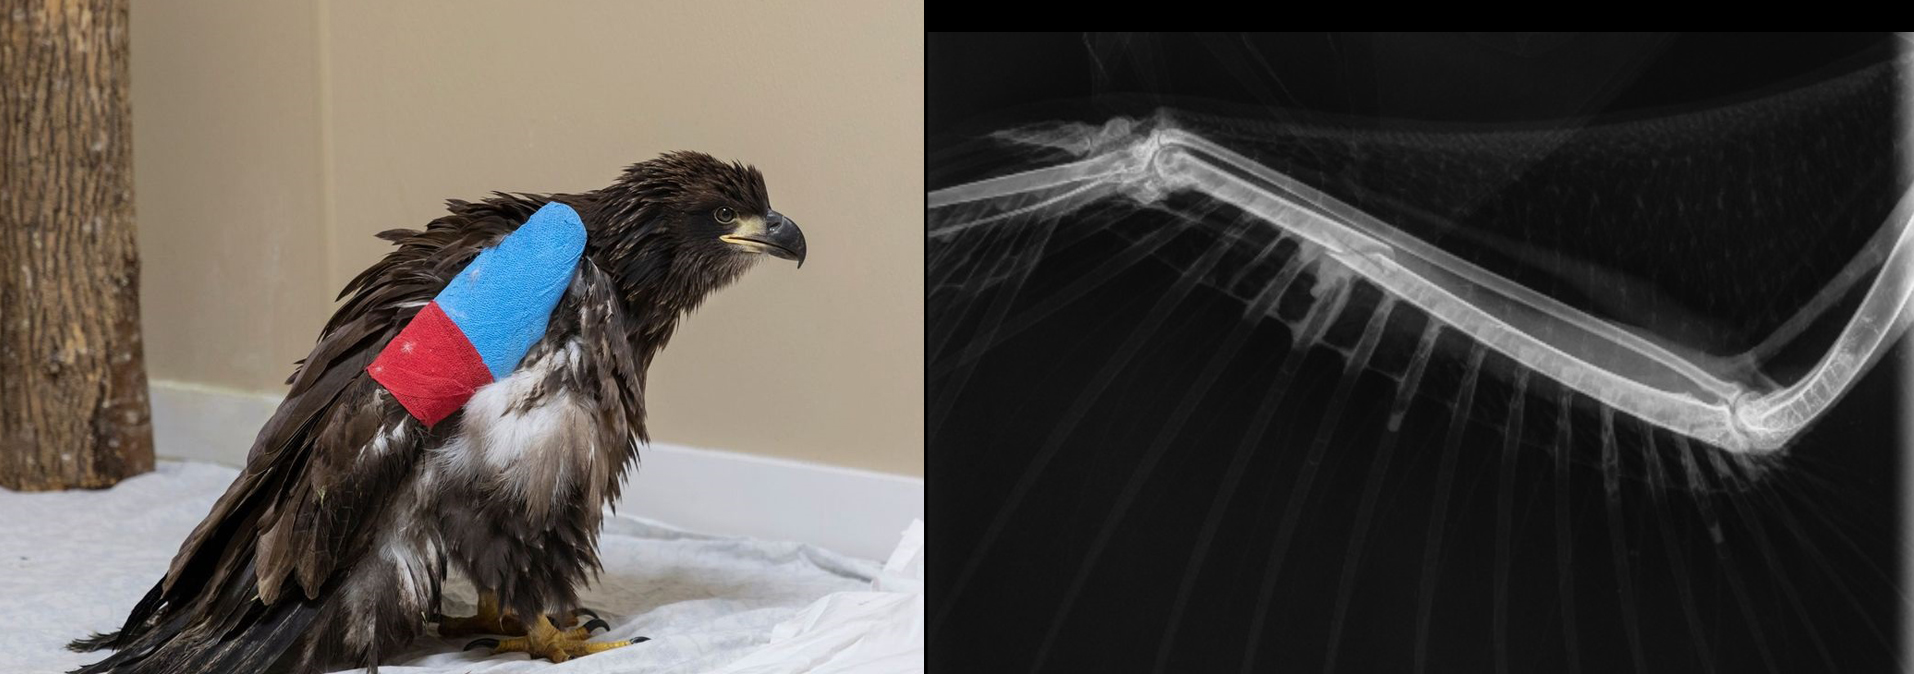 Eagle X-Ray and Cast